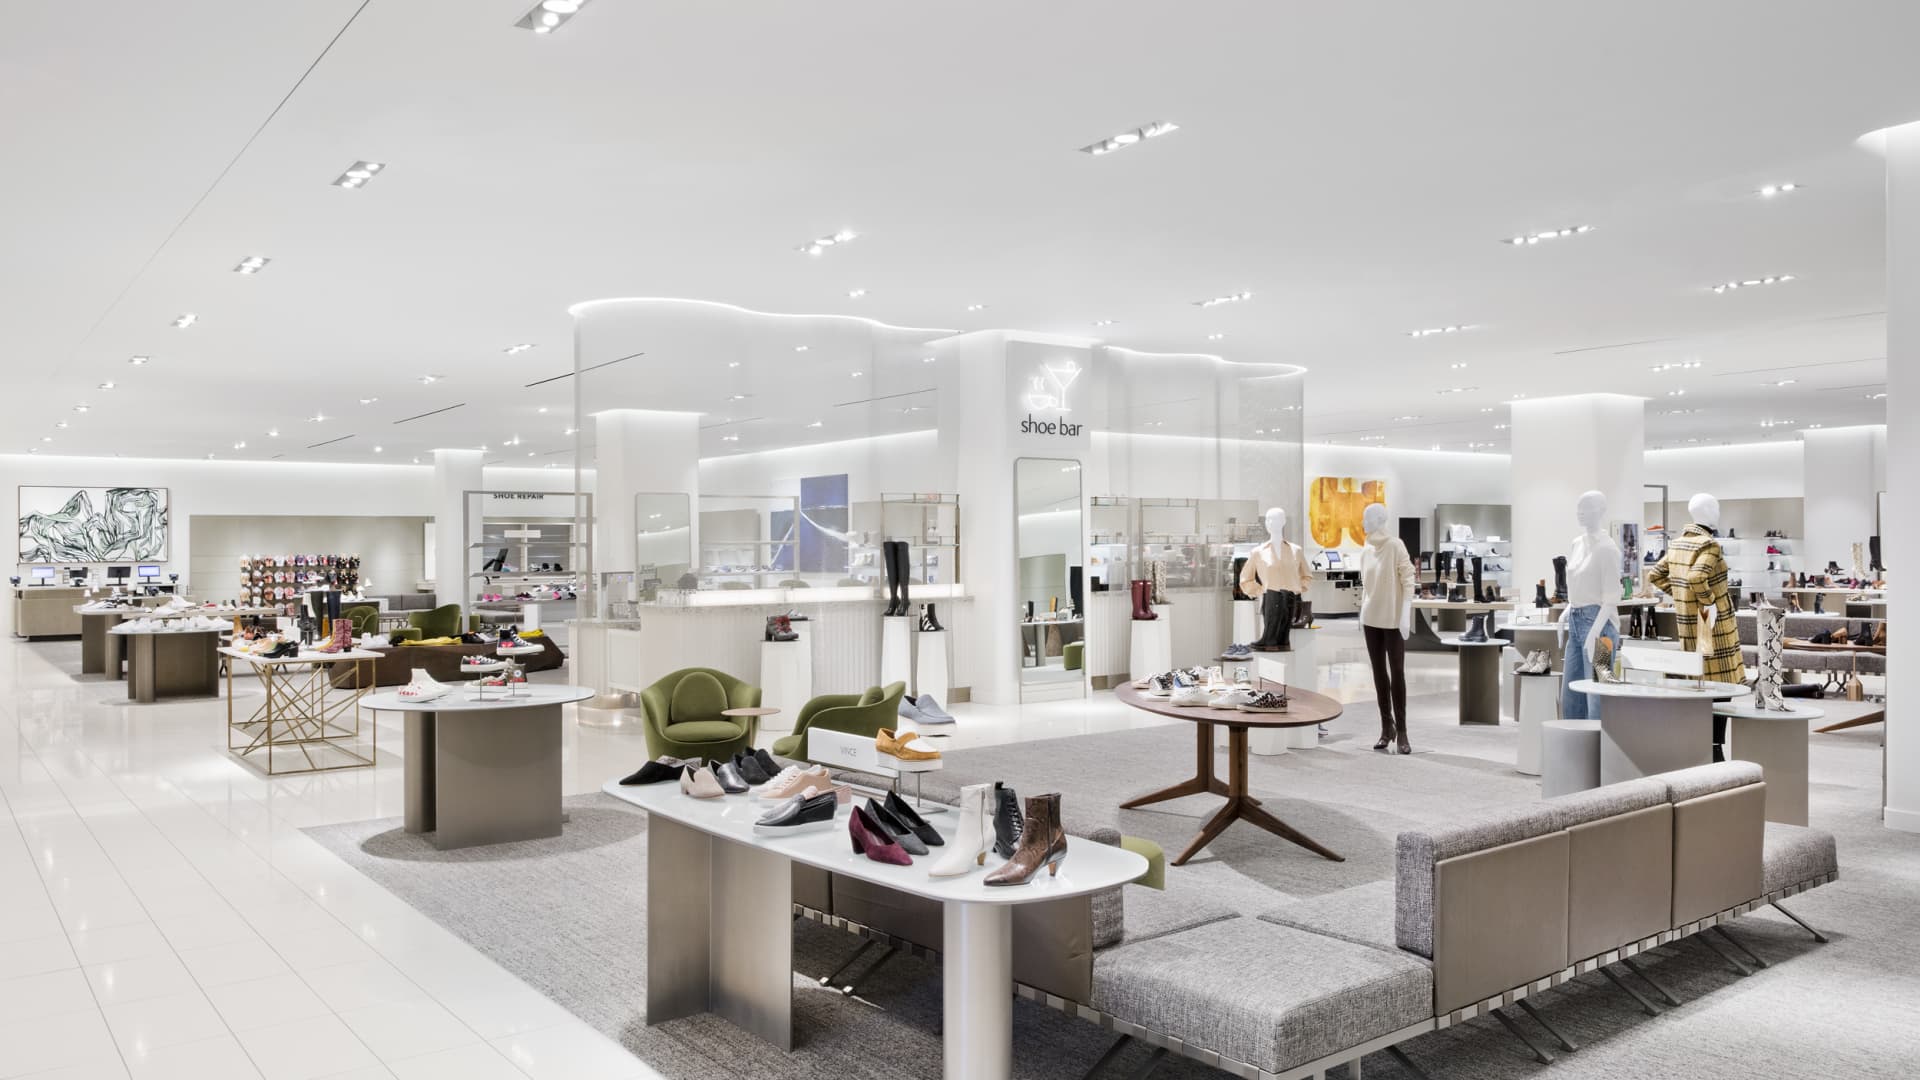 57th Street Nordstrom Flagship Now Open! 